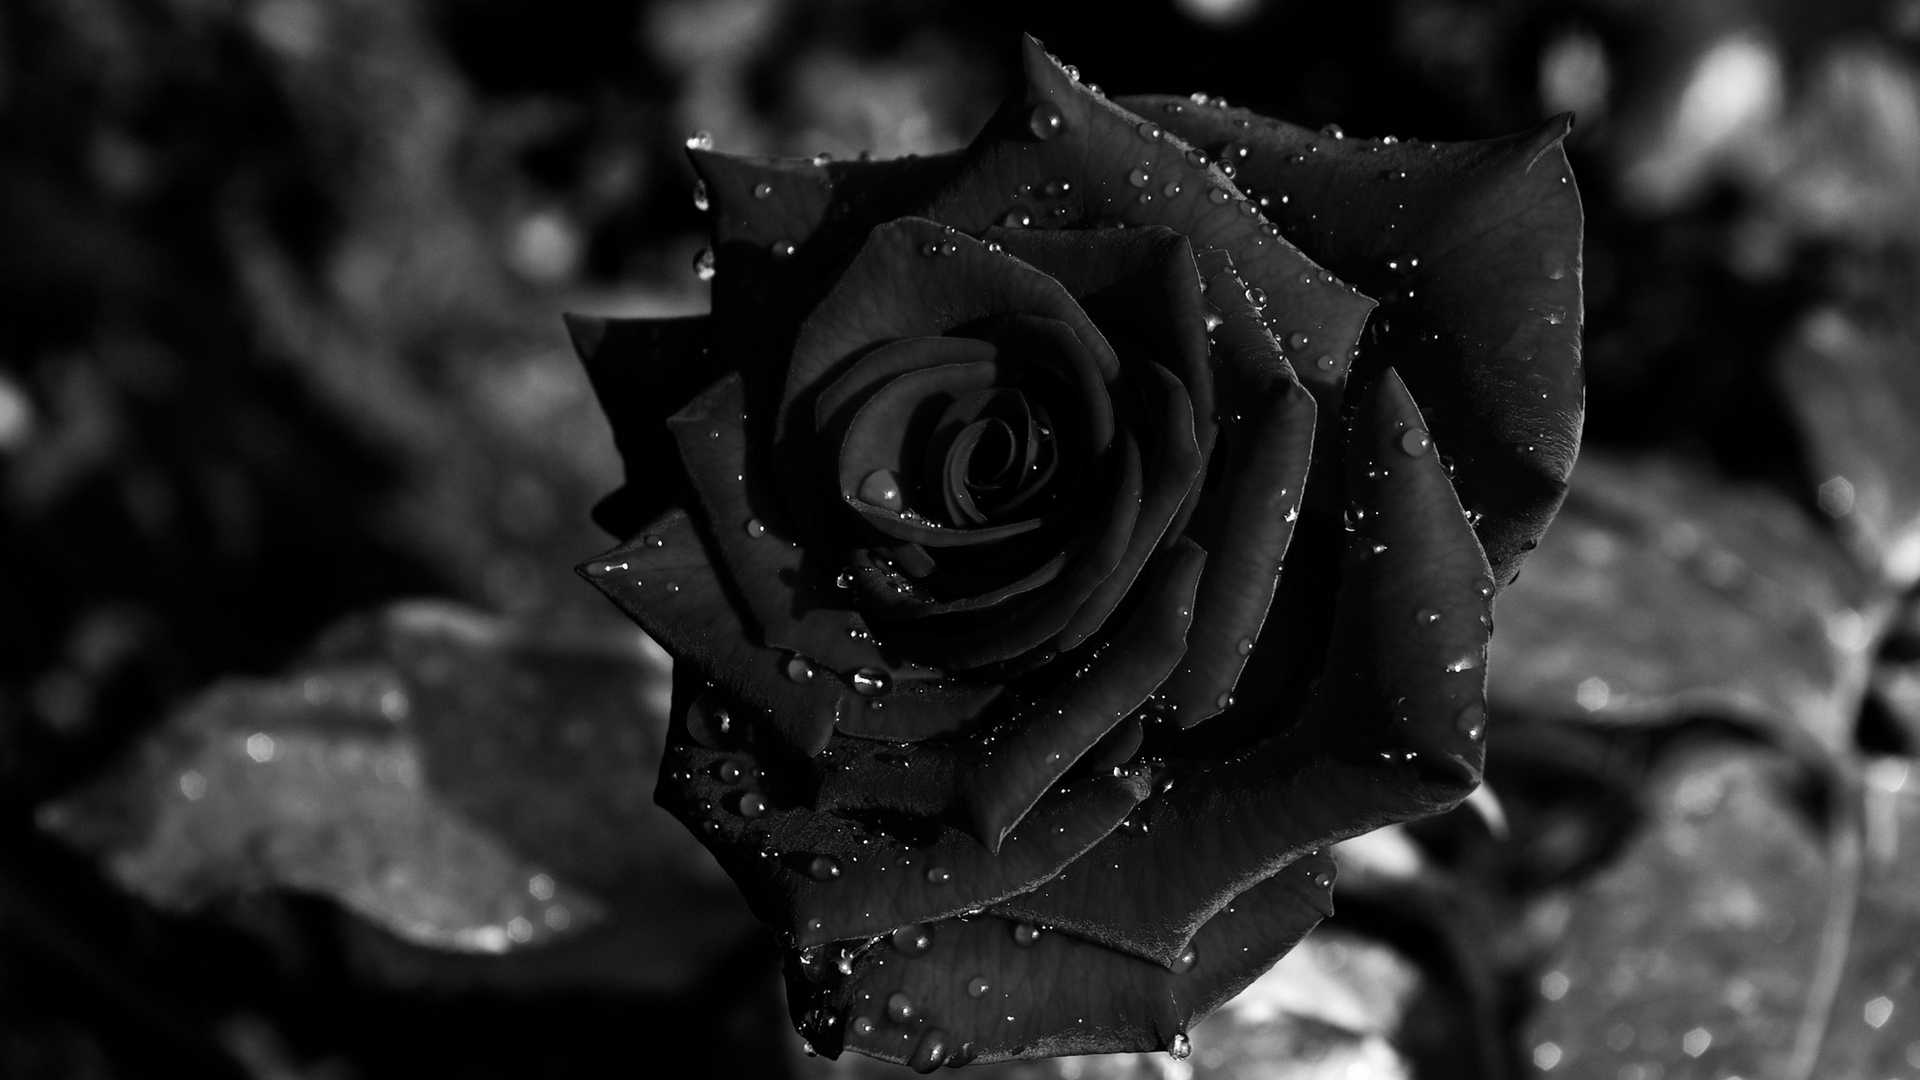 Black Rose Wallpaper Image Photos Pictures Background